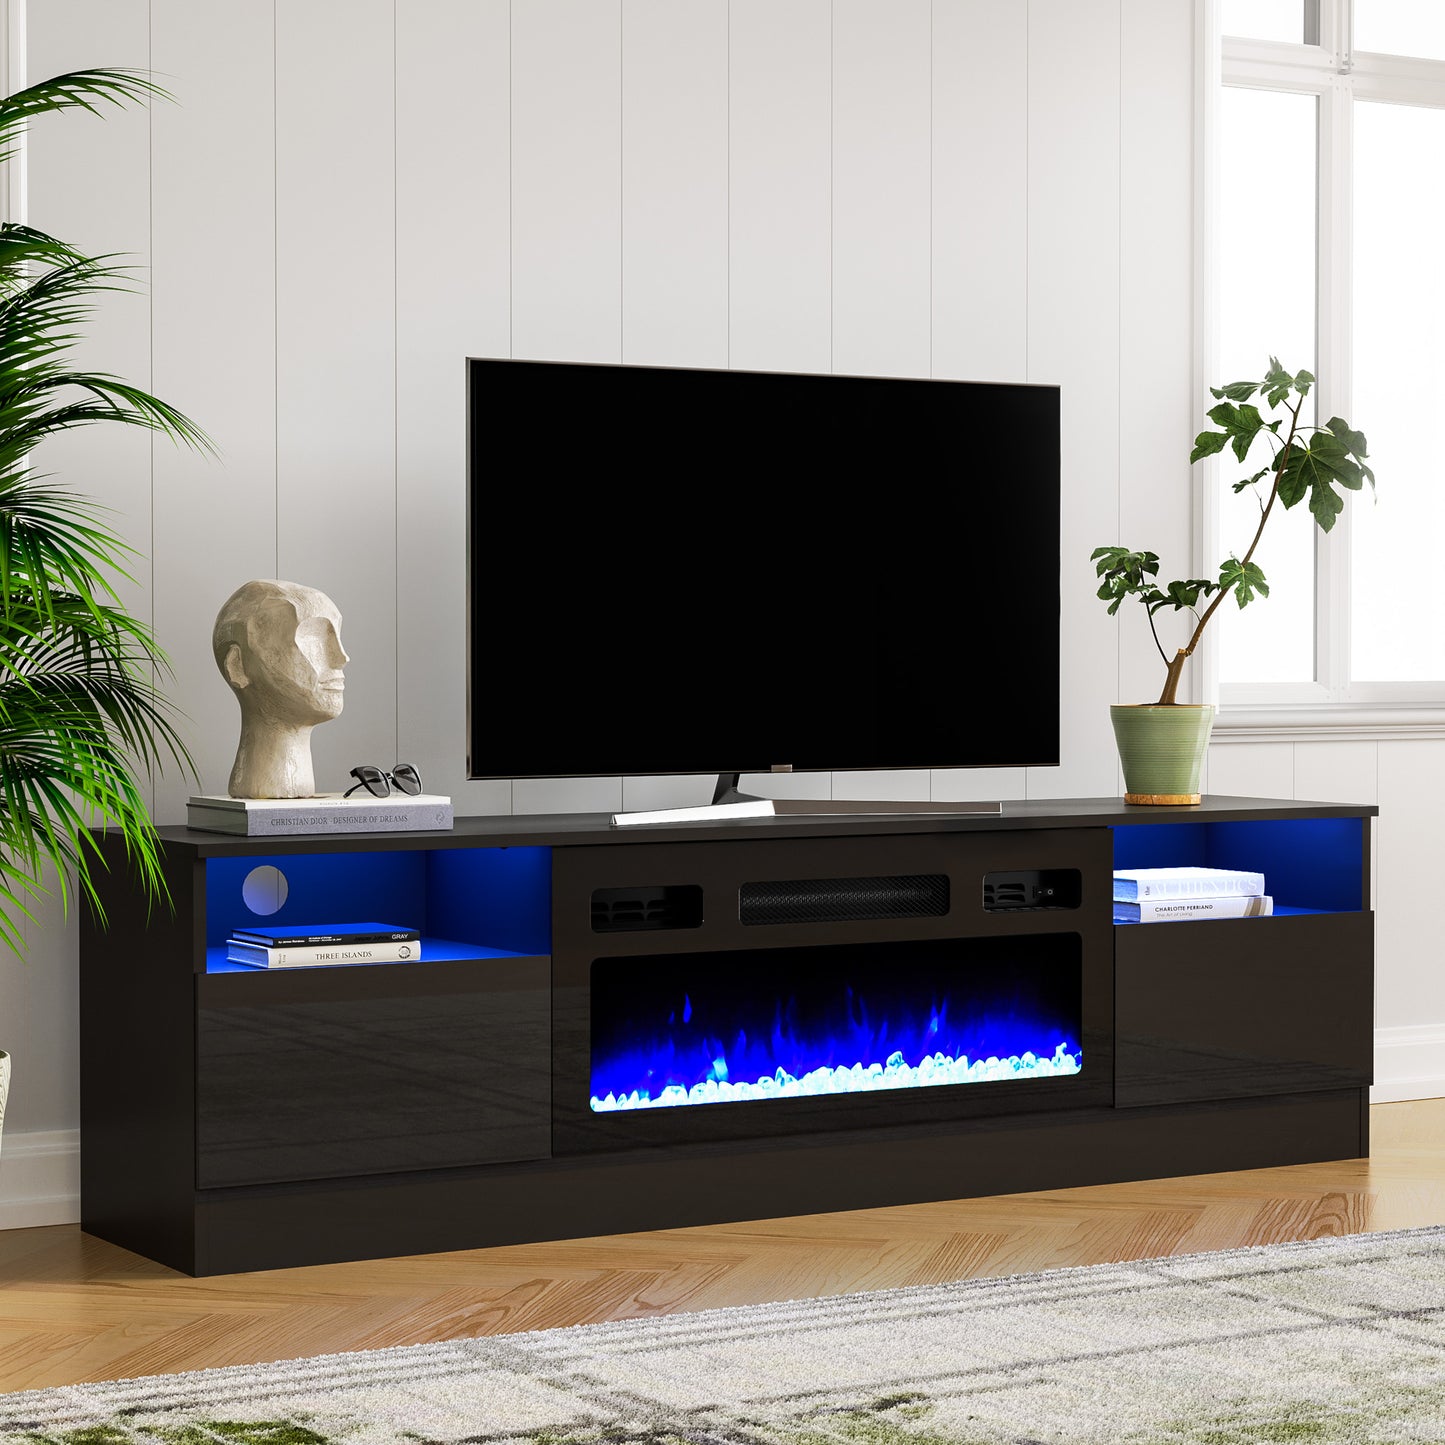 Fireplace TV Stand for 75 inch TV, LED TV Entertainment Center with 30" Electric Fireplace, High Gloss Modern Television Stand